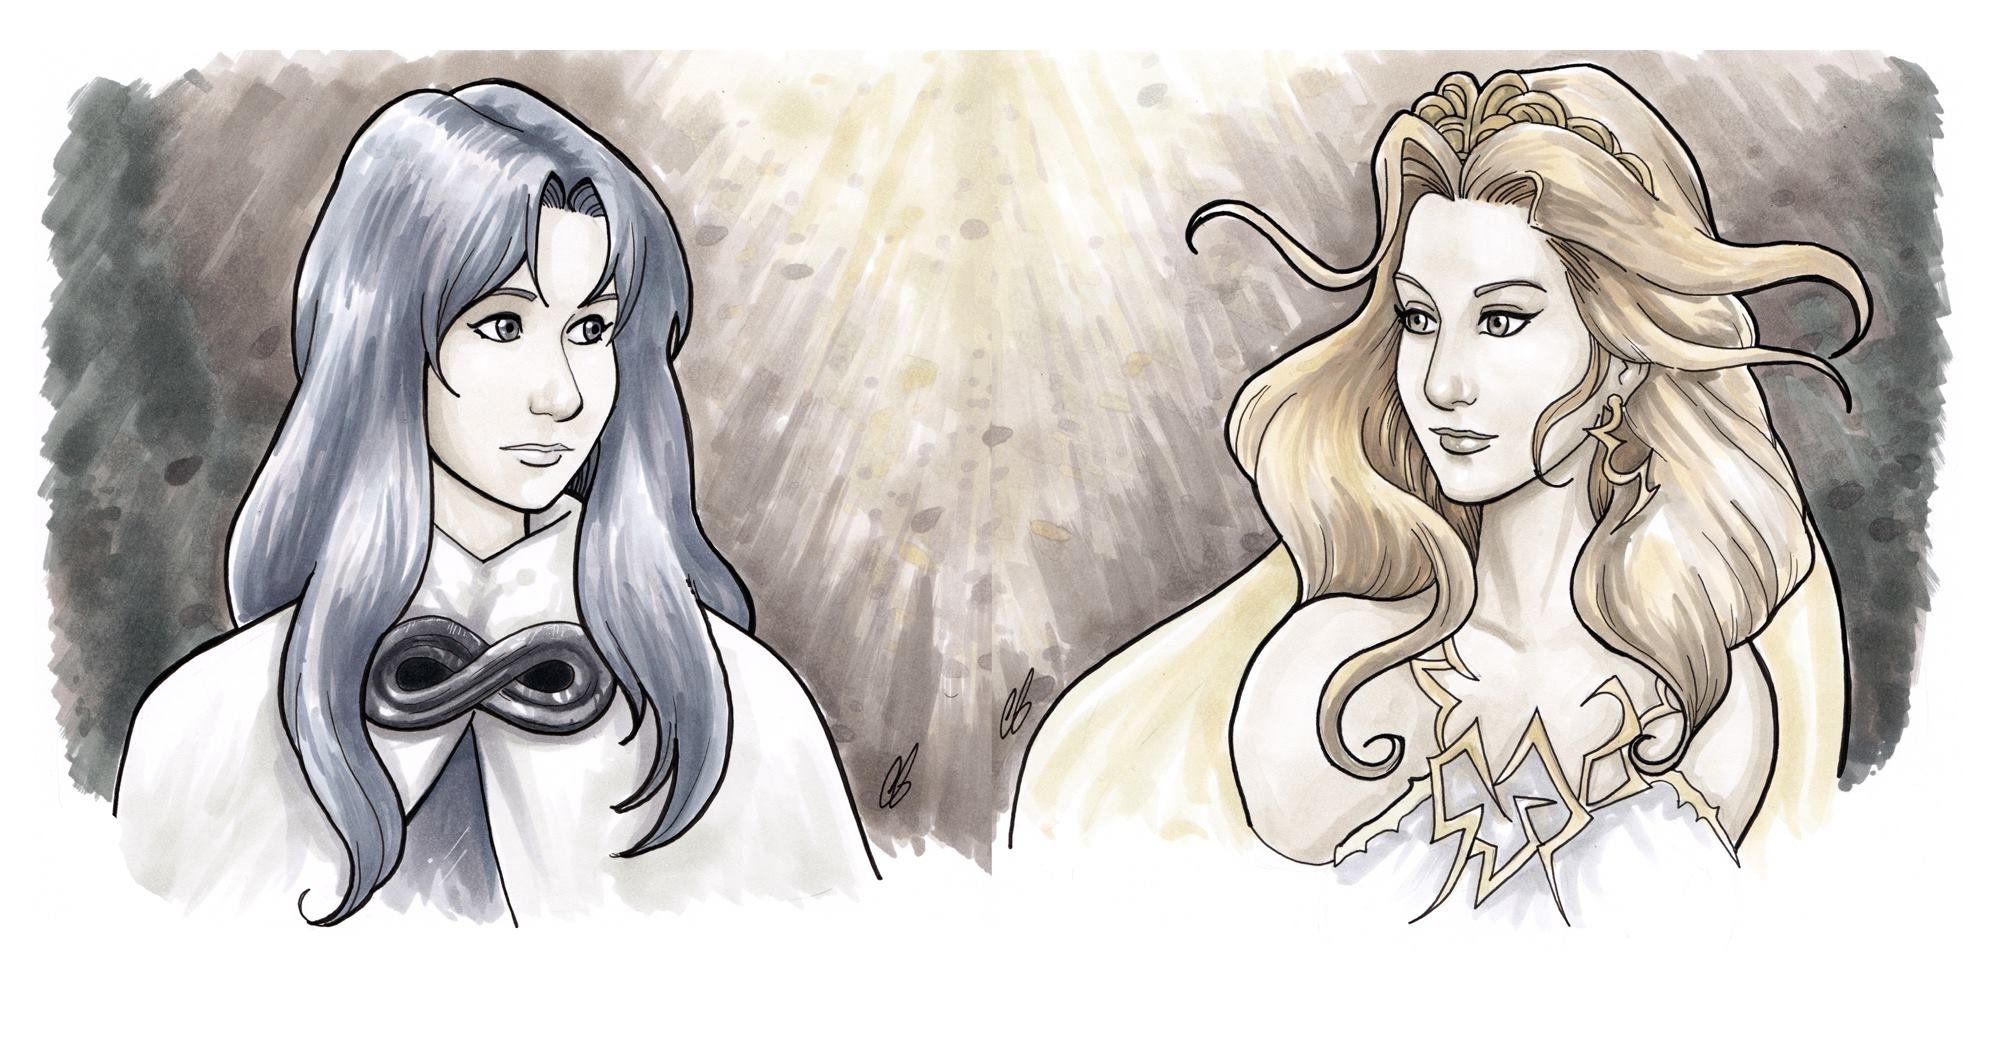 A Tale Of Two Goddesses Featuring Aura Hack Dot Hack Series And Cosmos Dissidia Final Fantasy Duodecim In Andreas G S Stand Alone Pieces Comic Art Gallery Room